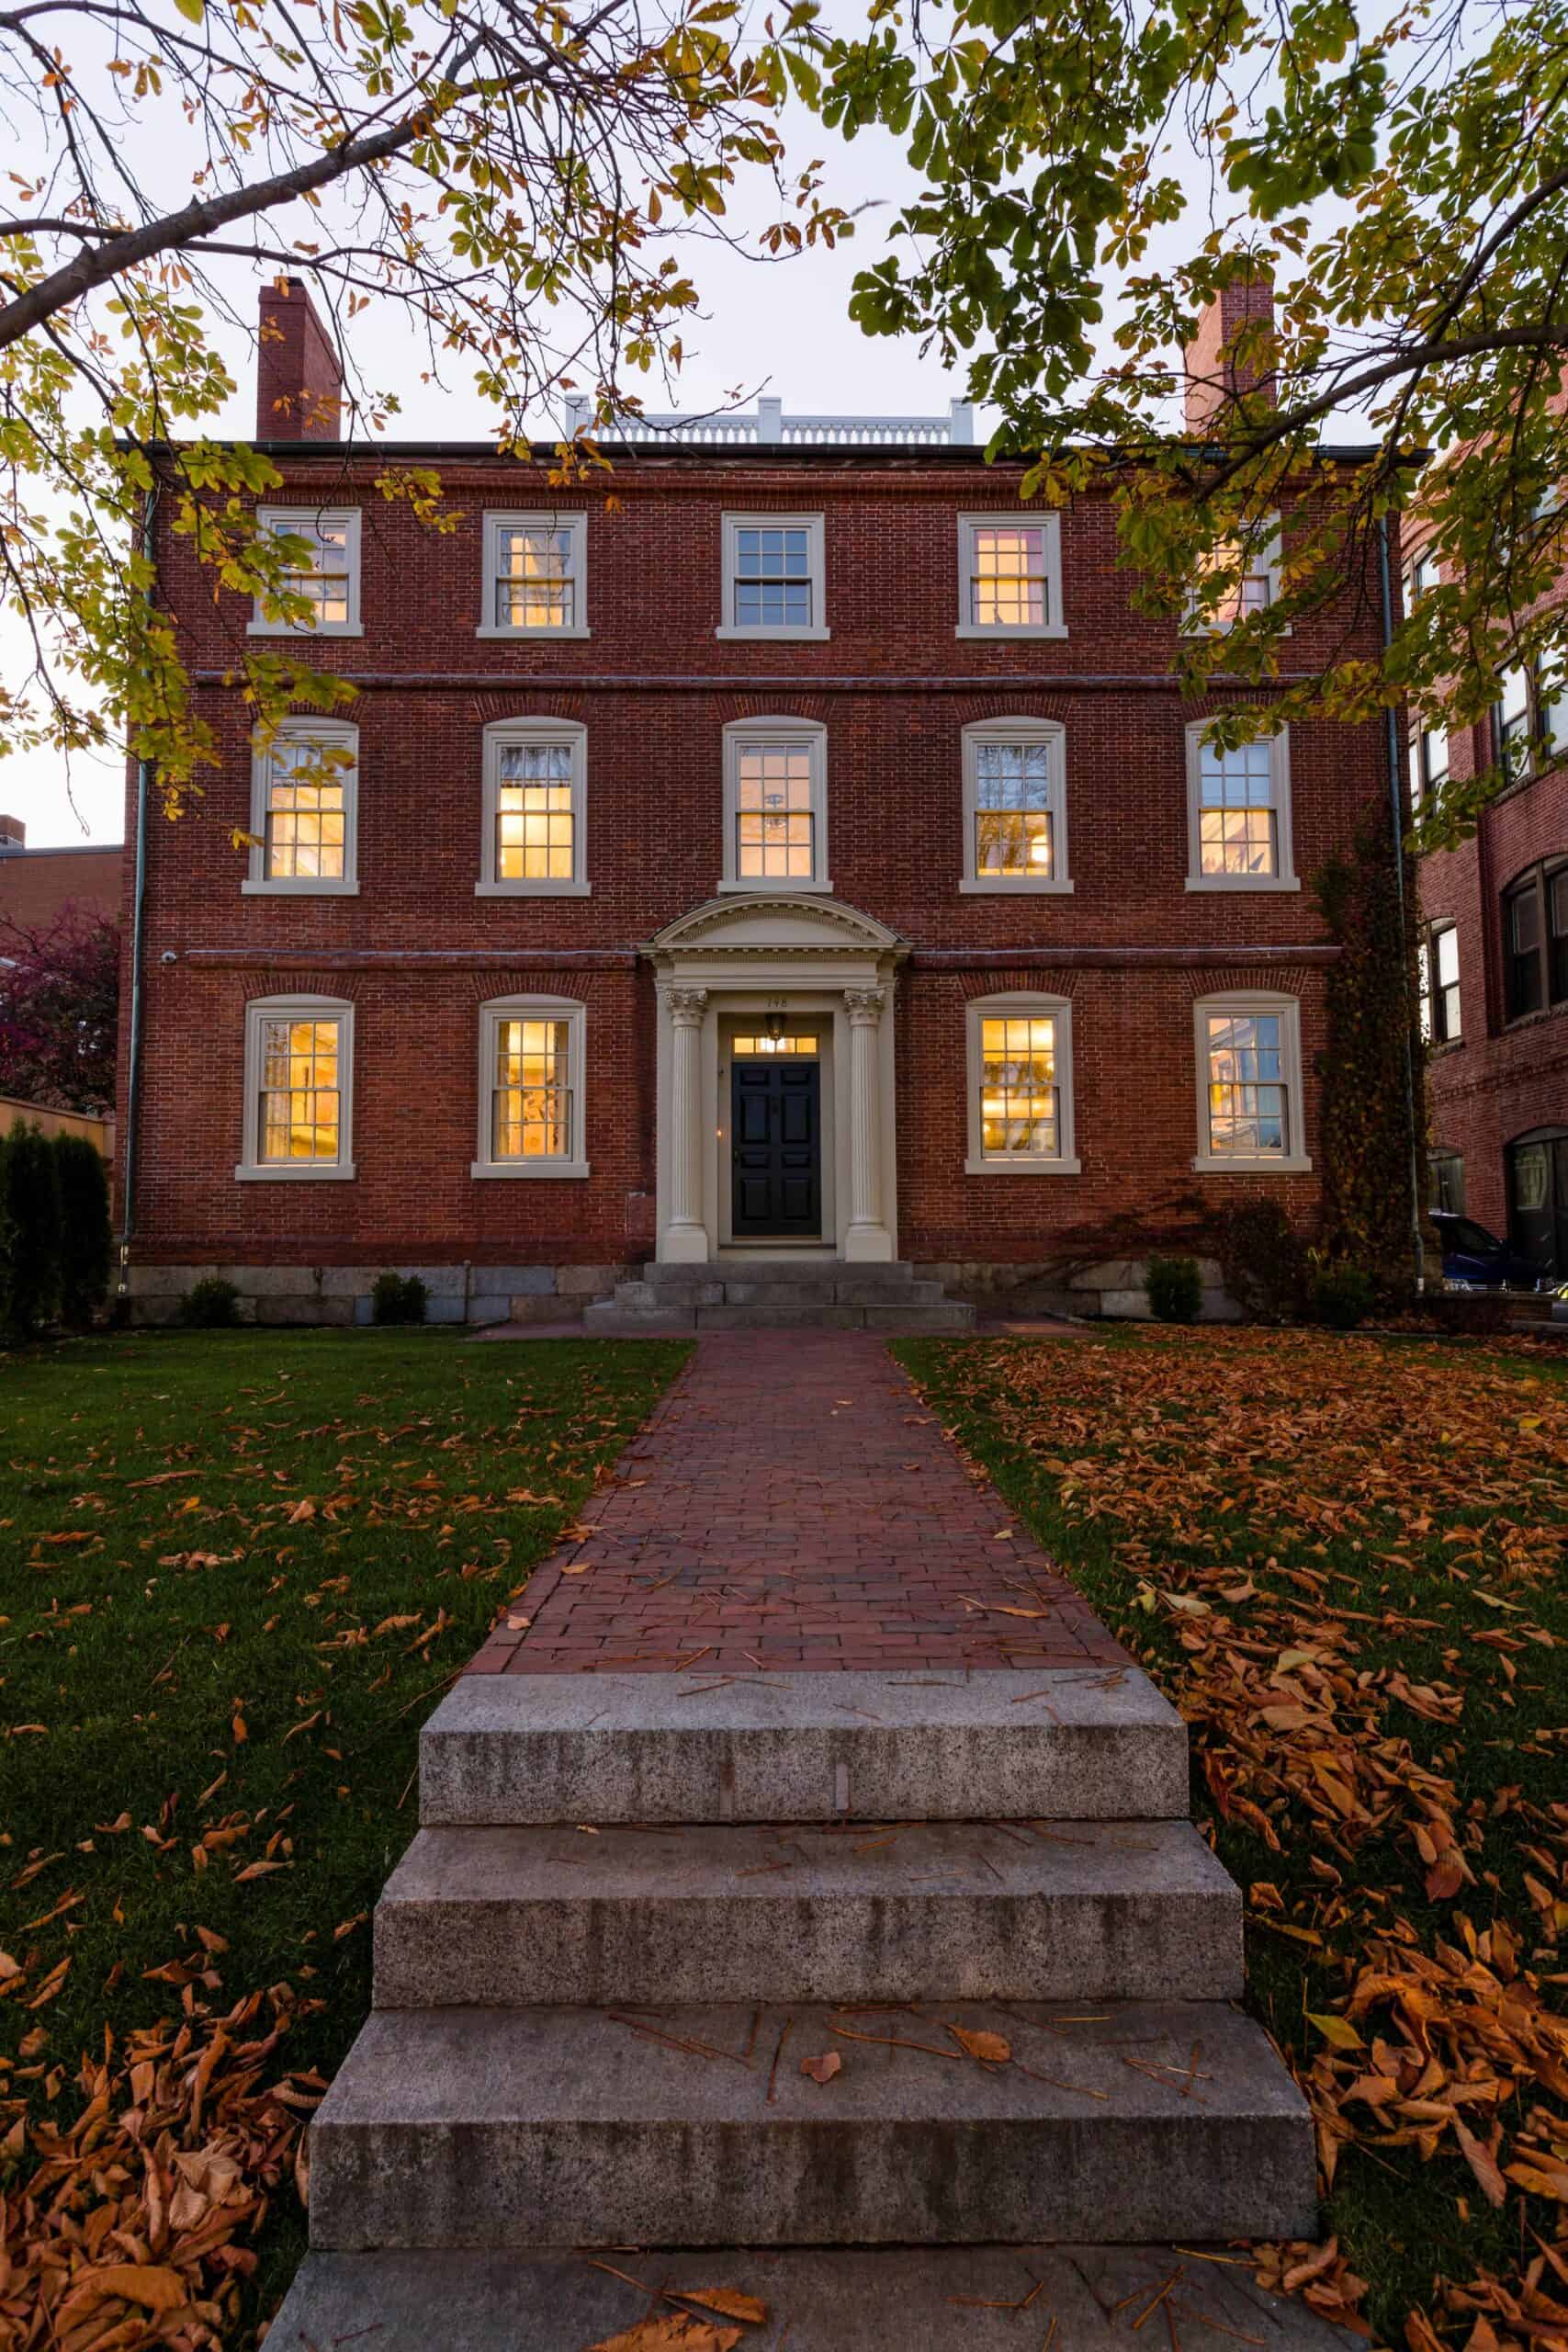 A somewhat imposing historical haunted hotel made of red bricks is seen on a fall day with yellow-brown leaves scattered over the lawn.